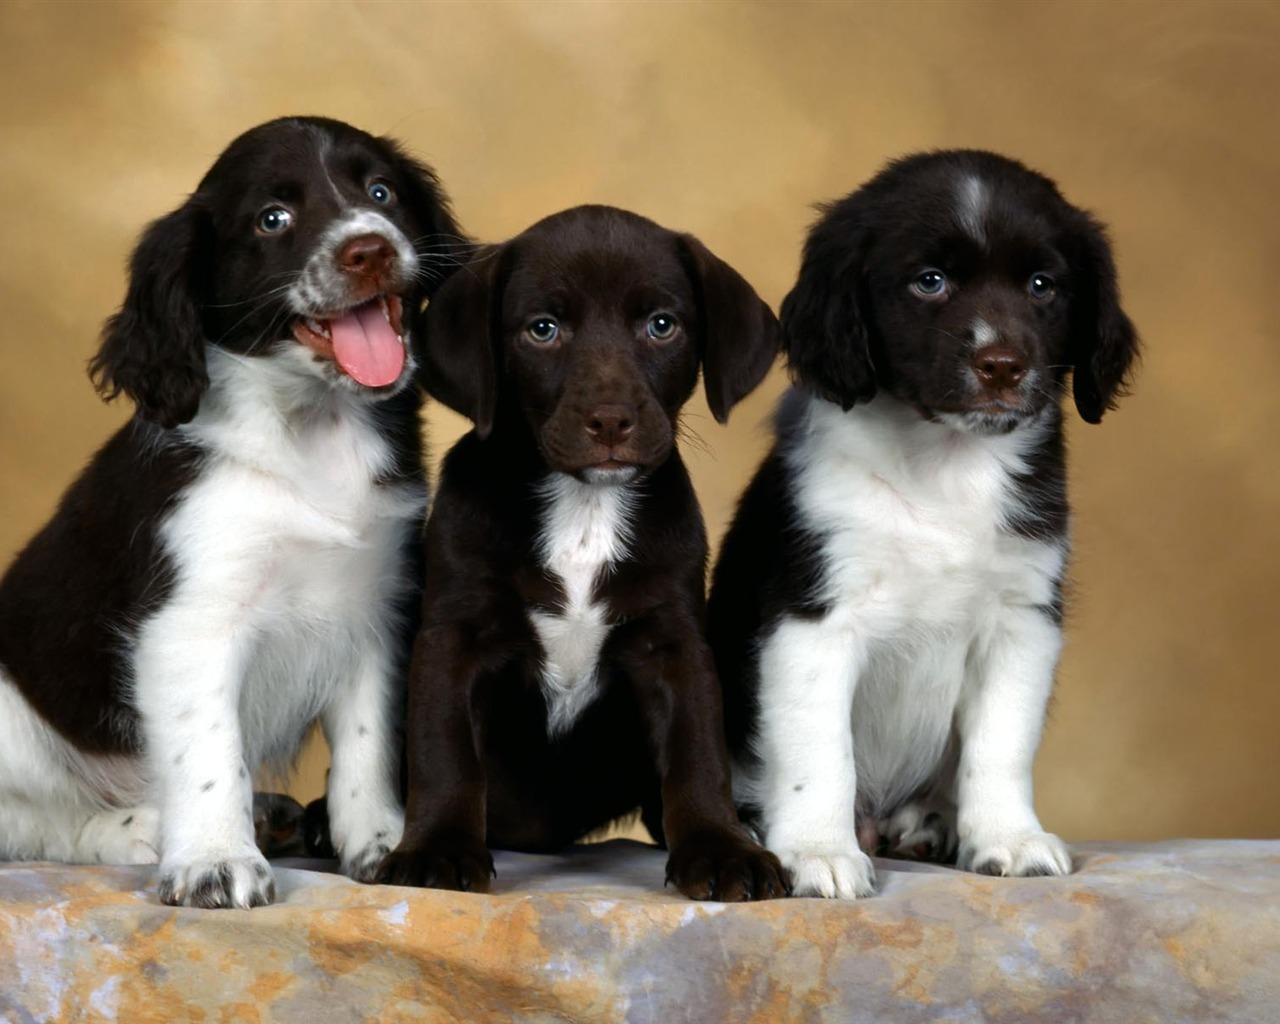 Puppy Photo HD wallpapers (1) #15 - 1280x1024